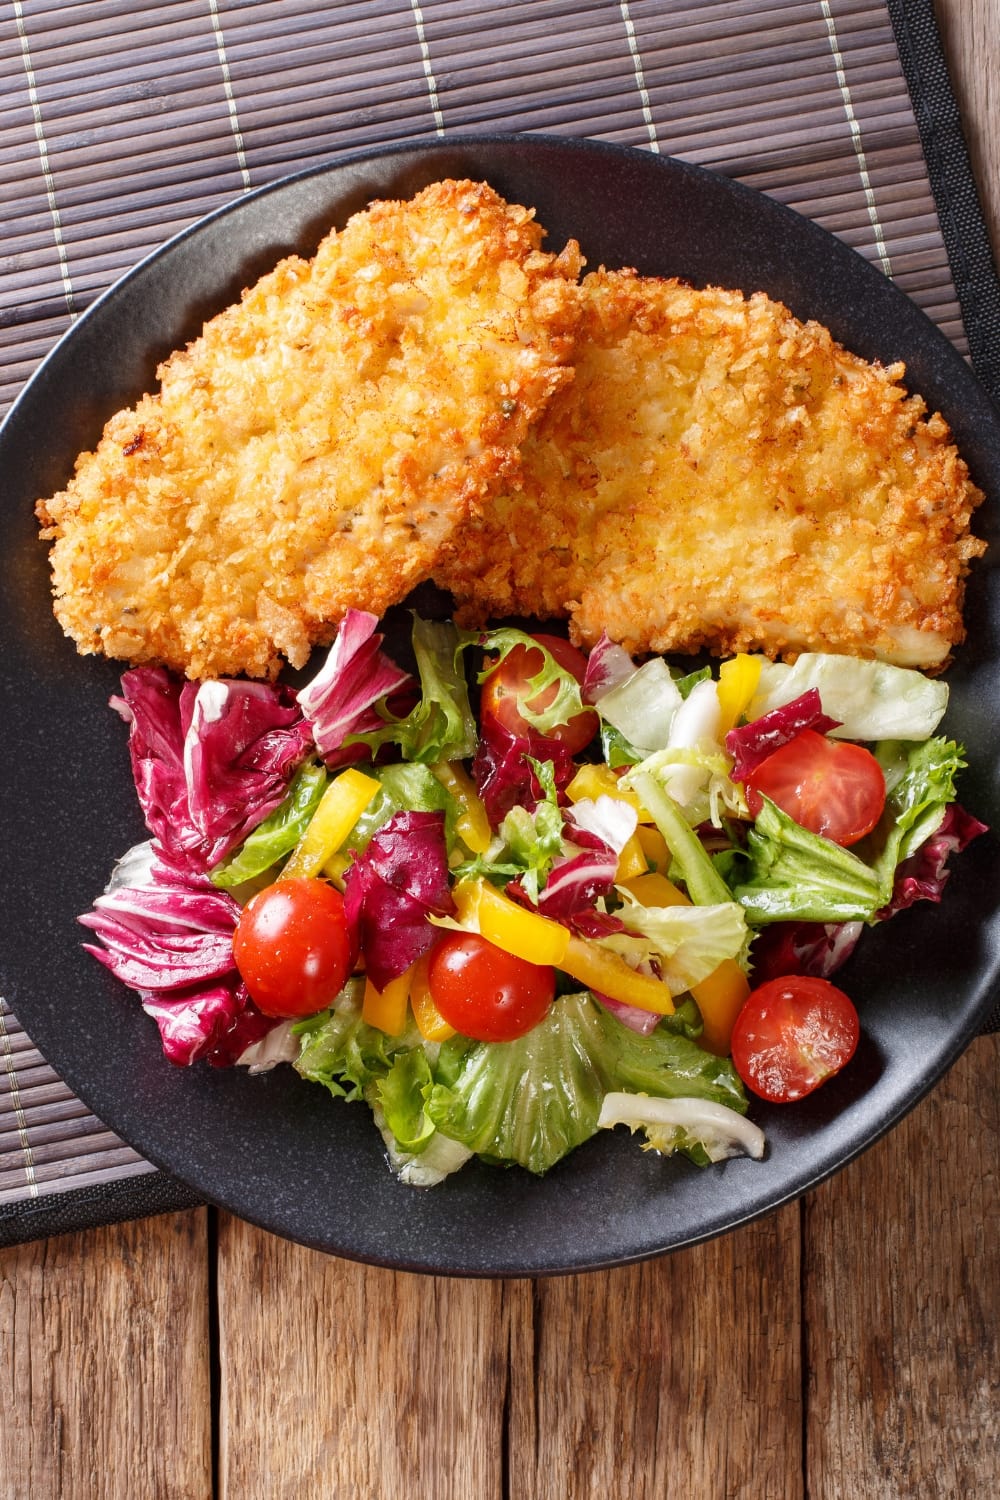 Turkey Fillet with Breadcrumbs and Vegetables